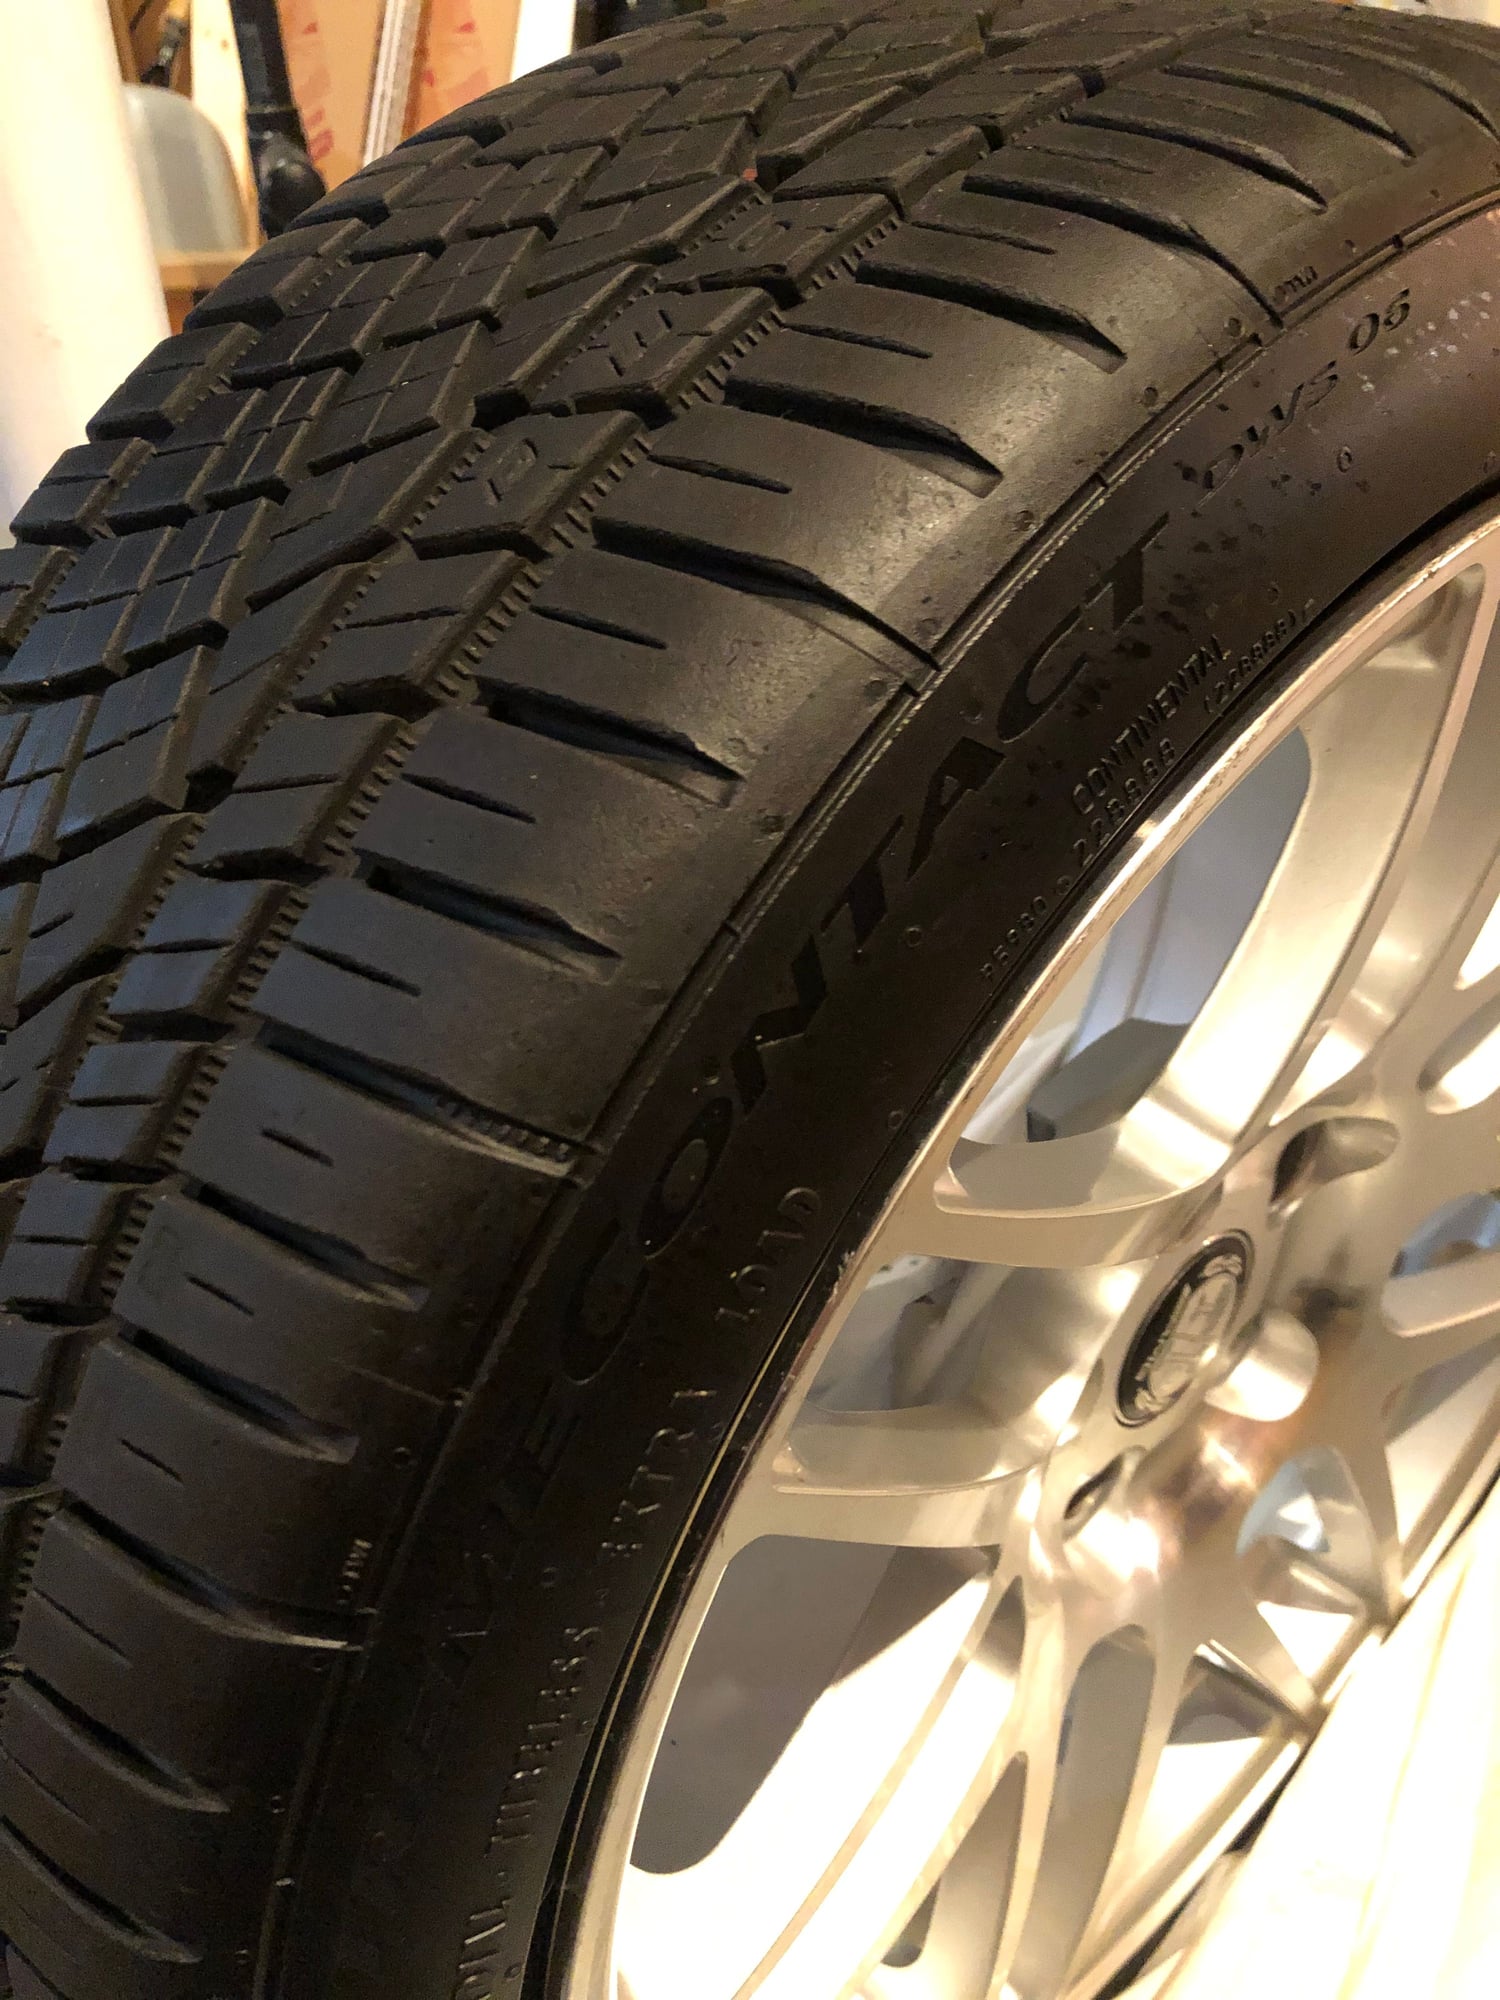 Drivetrain - Toronto: 18” Forgestar F14 wheels and Continental snowtires (very cheap, must sell!) - Used - 2008 to 2012 Mercedes-Benz C300 - Toronto, ON L4E1C5, Canada